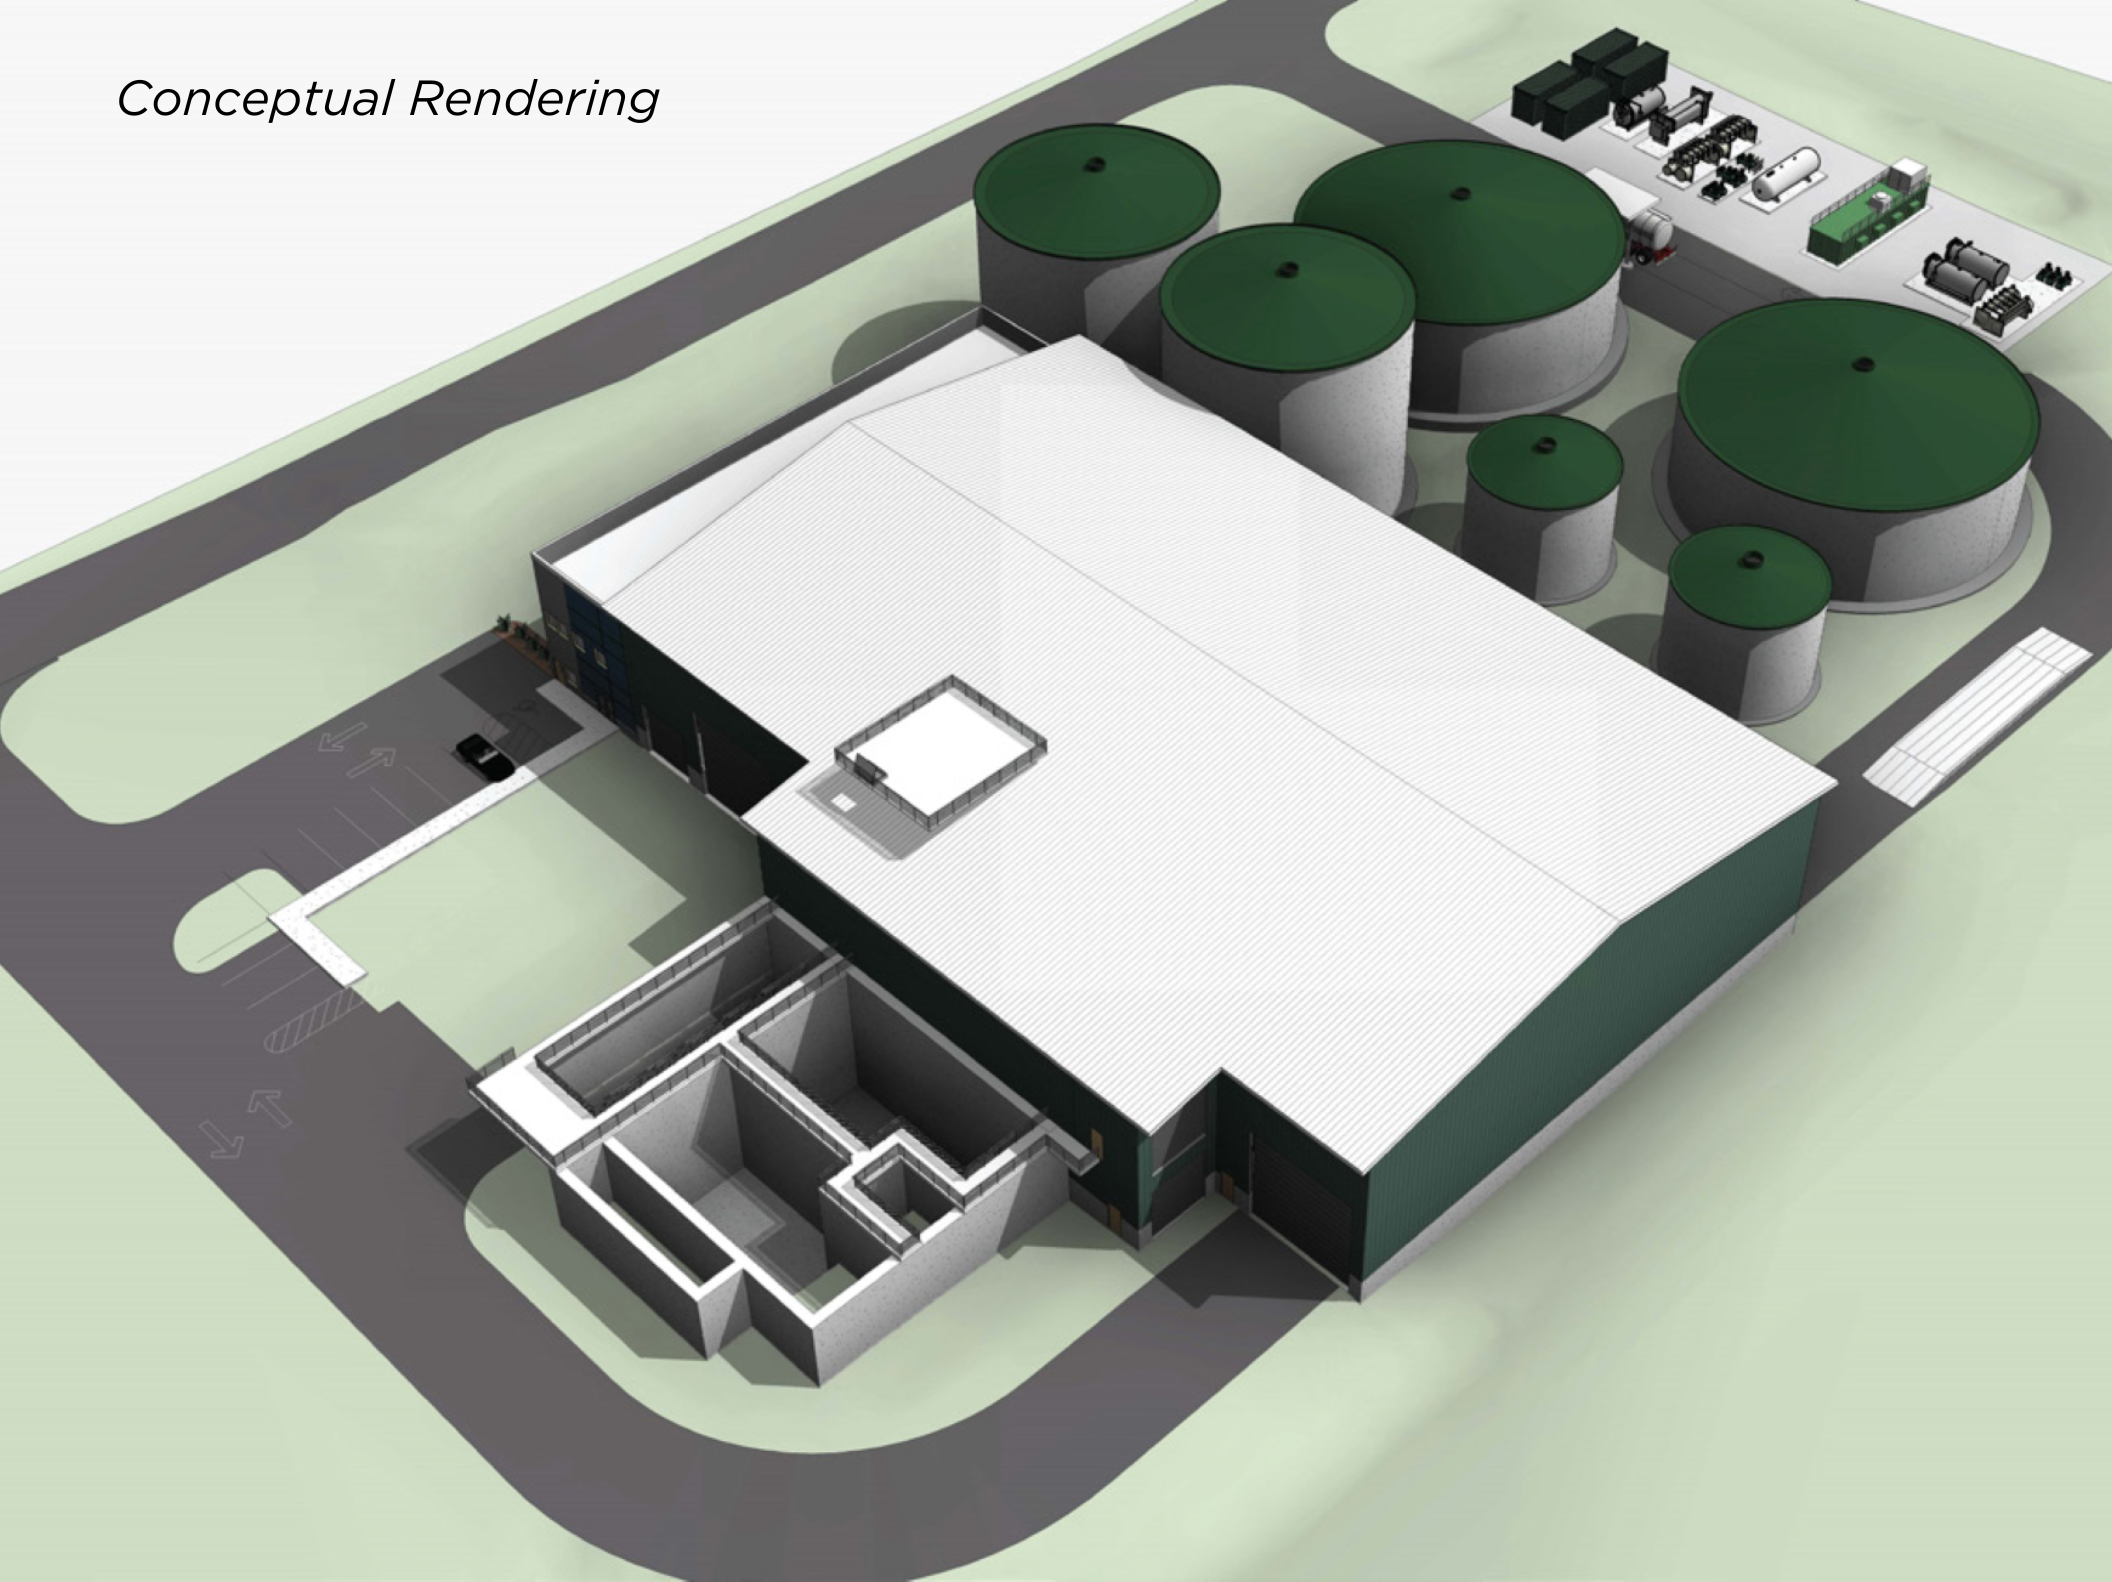 Conceptual Rendering of a bioenergy facility